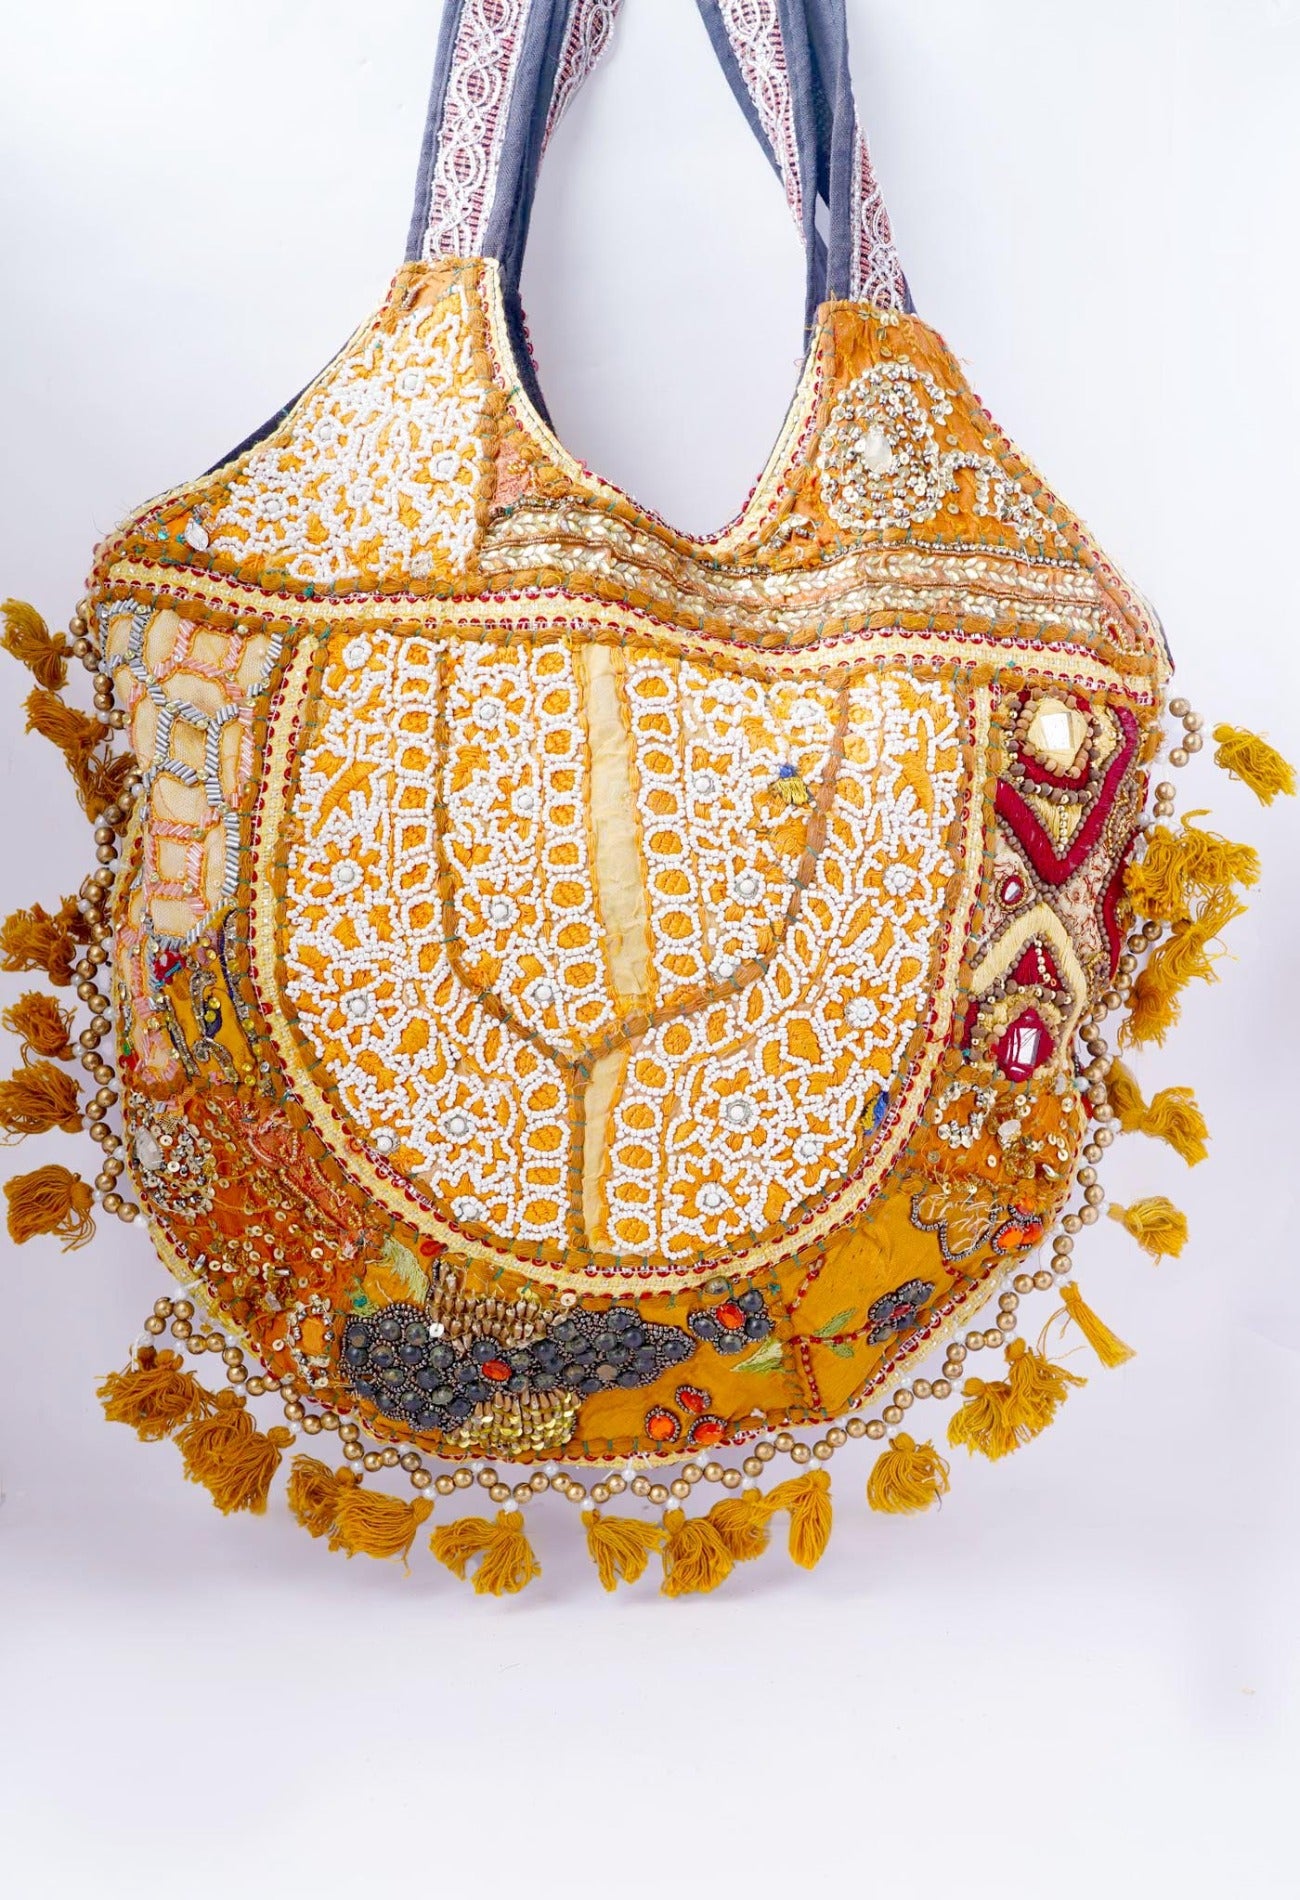 Online Shopping for Yellow Indian Handicraft Embroidered Hand Bag with Weaving from Rajasthan at Unnatisilks.com India_x000D_
Online Shopping for Yellow Indian Handicraft Embroidered Hand Bag with Weaving from Rajasthan at Unnatisilks.com India_x000D_
Online Shopping for Yellow Indian Handicraft Embroidered Hand Bag with Weaving from Rajasthan at Unnatisilks.com India_x000D_
Online Shopping for Yellow Indian Handicraft Embroidered Hand Bag with Weaving from Rajasthan at Unnatisilks.com India_x000D_
